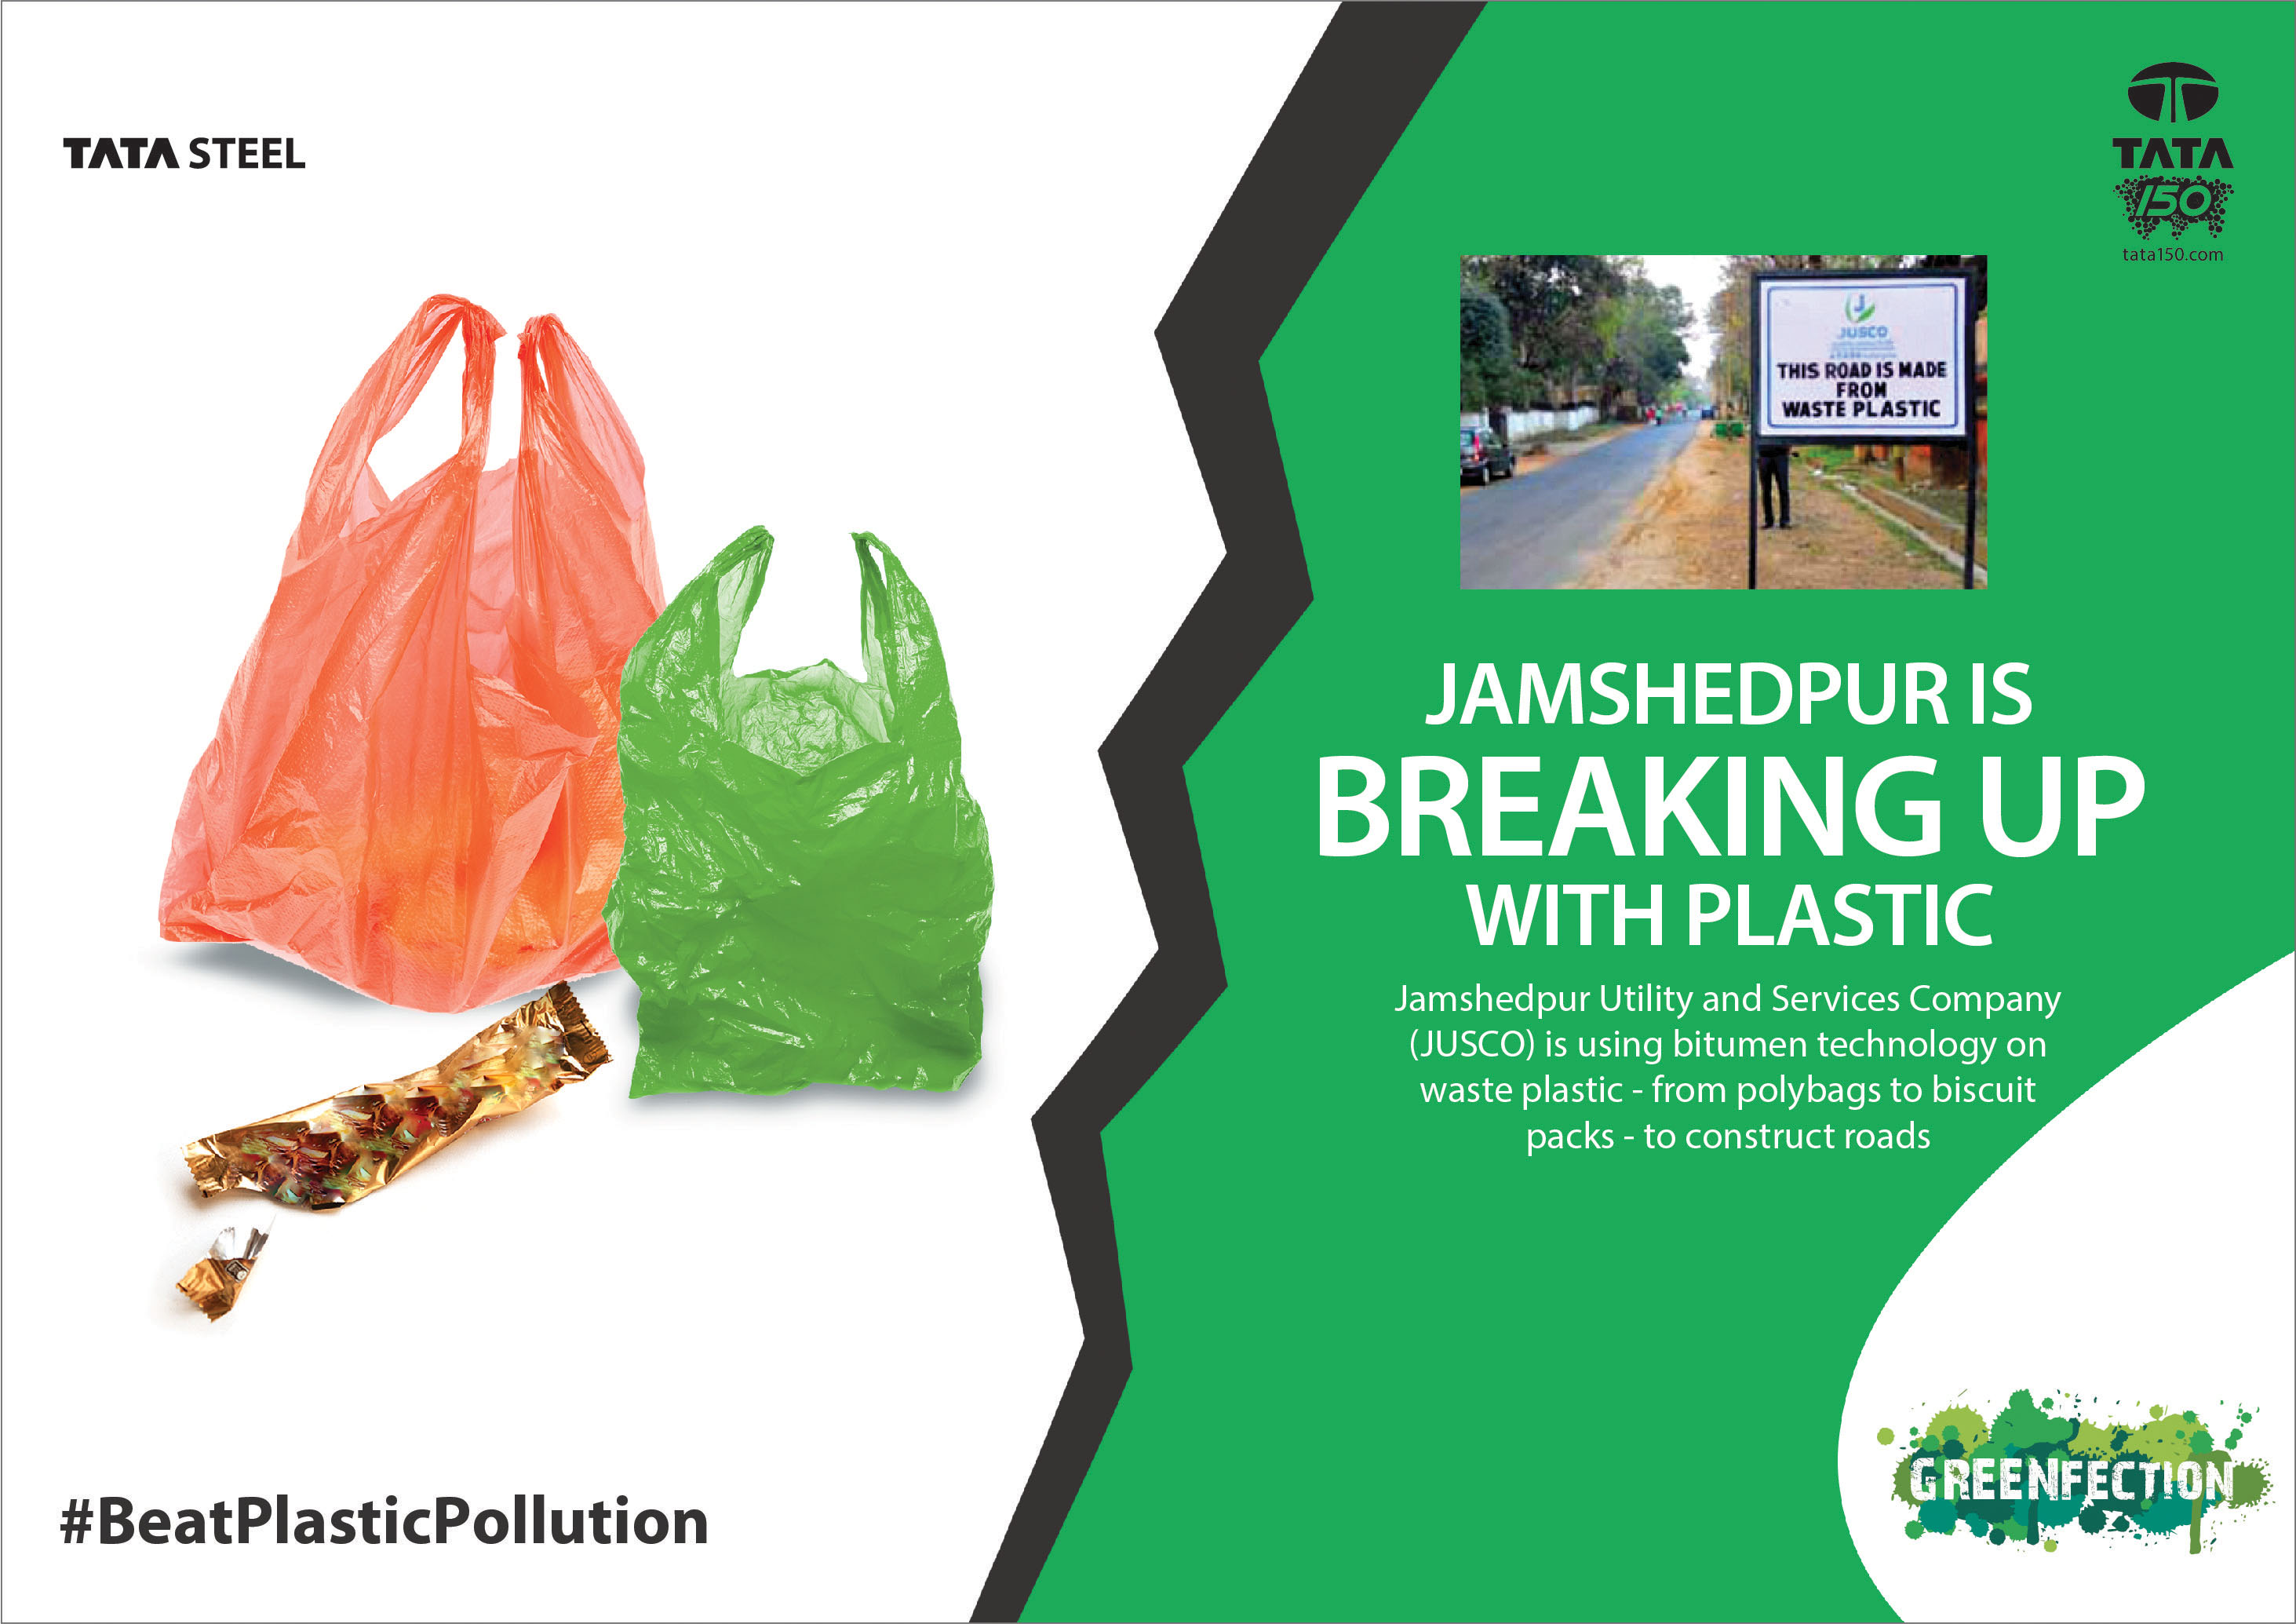 Jamshedpur is breaking up with plastic